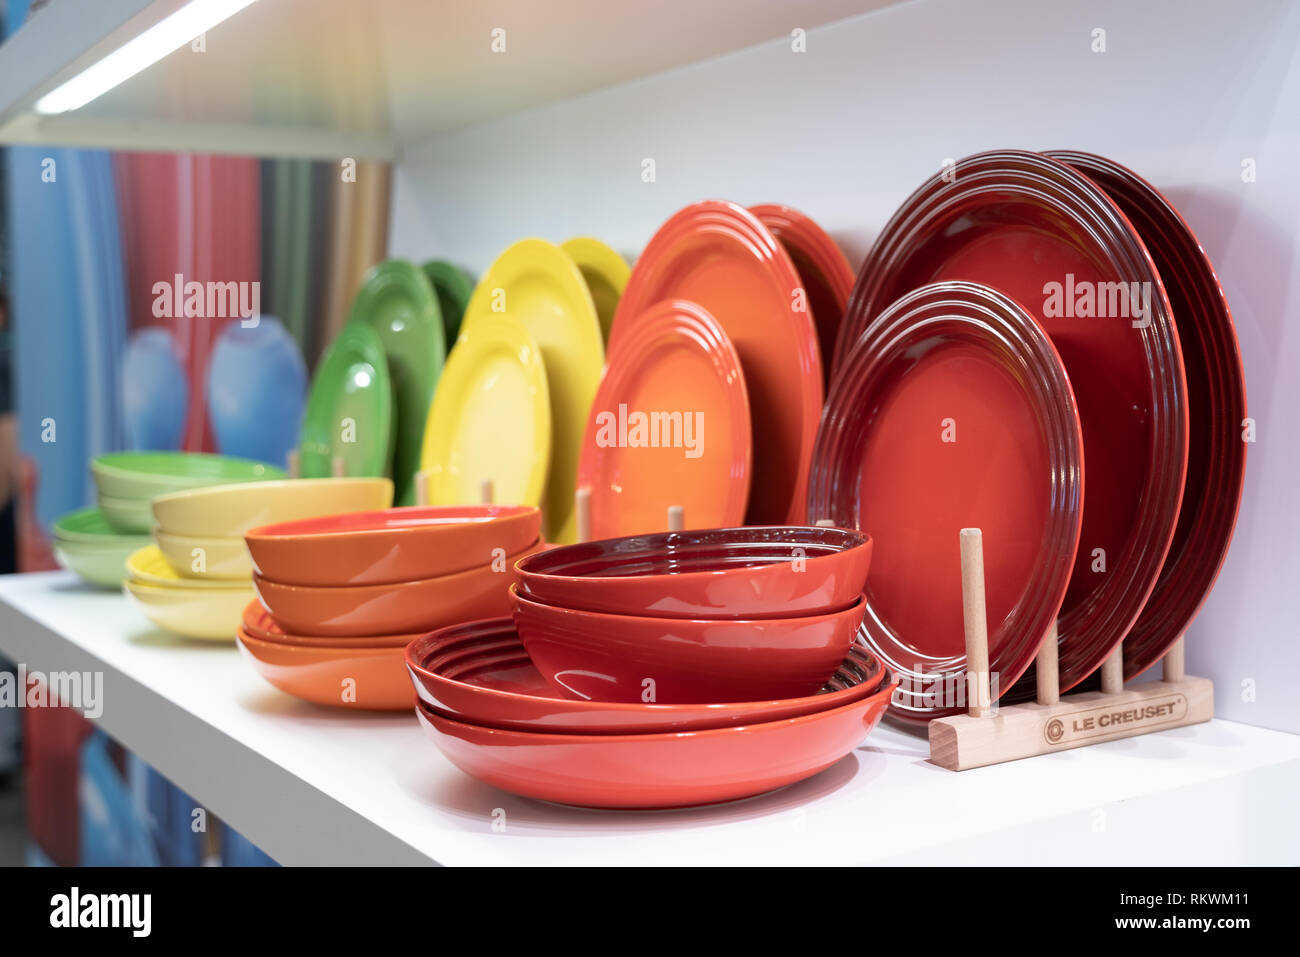 Frankfurt, Germany. 11th Feb, 2019. Impressions from the Ambiente trade  fair 2019: Le Creuset plates show display. Ambiente is a leading consumer  goods trade fair with more than 4300 exhibitors and 130,000